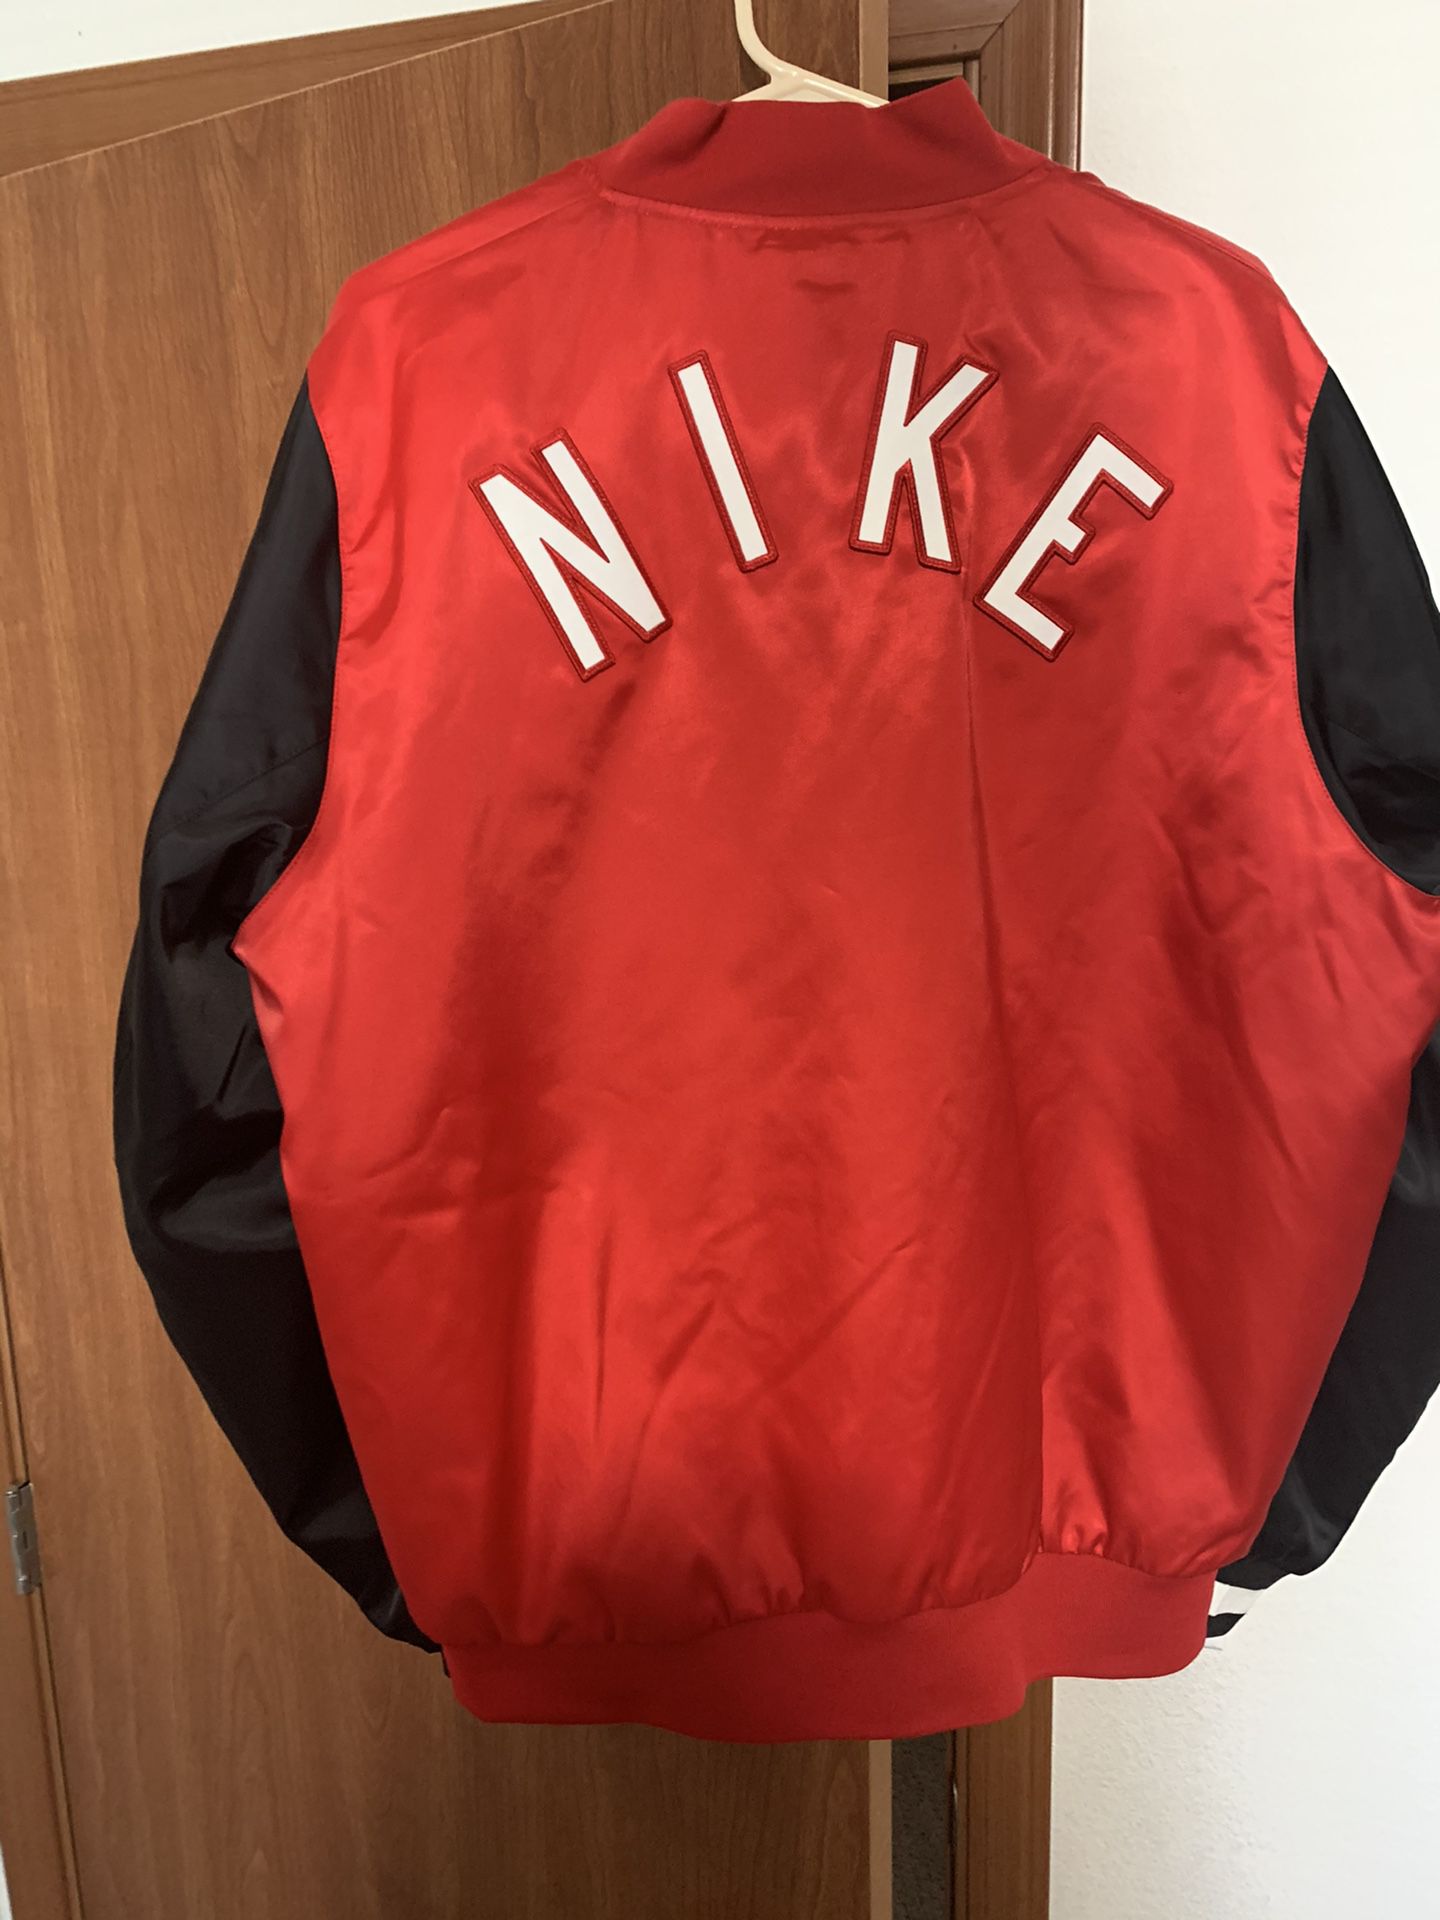 Nike Air Woven Jacket Mens Red Black White (Size Large)